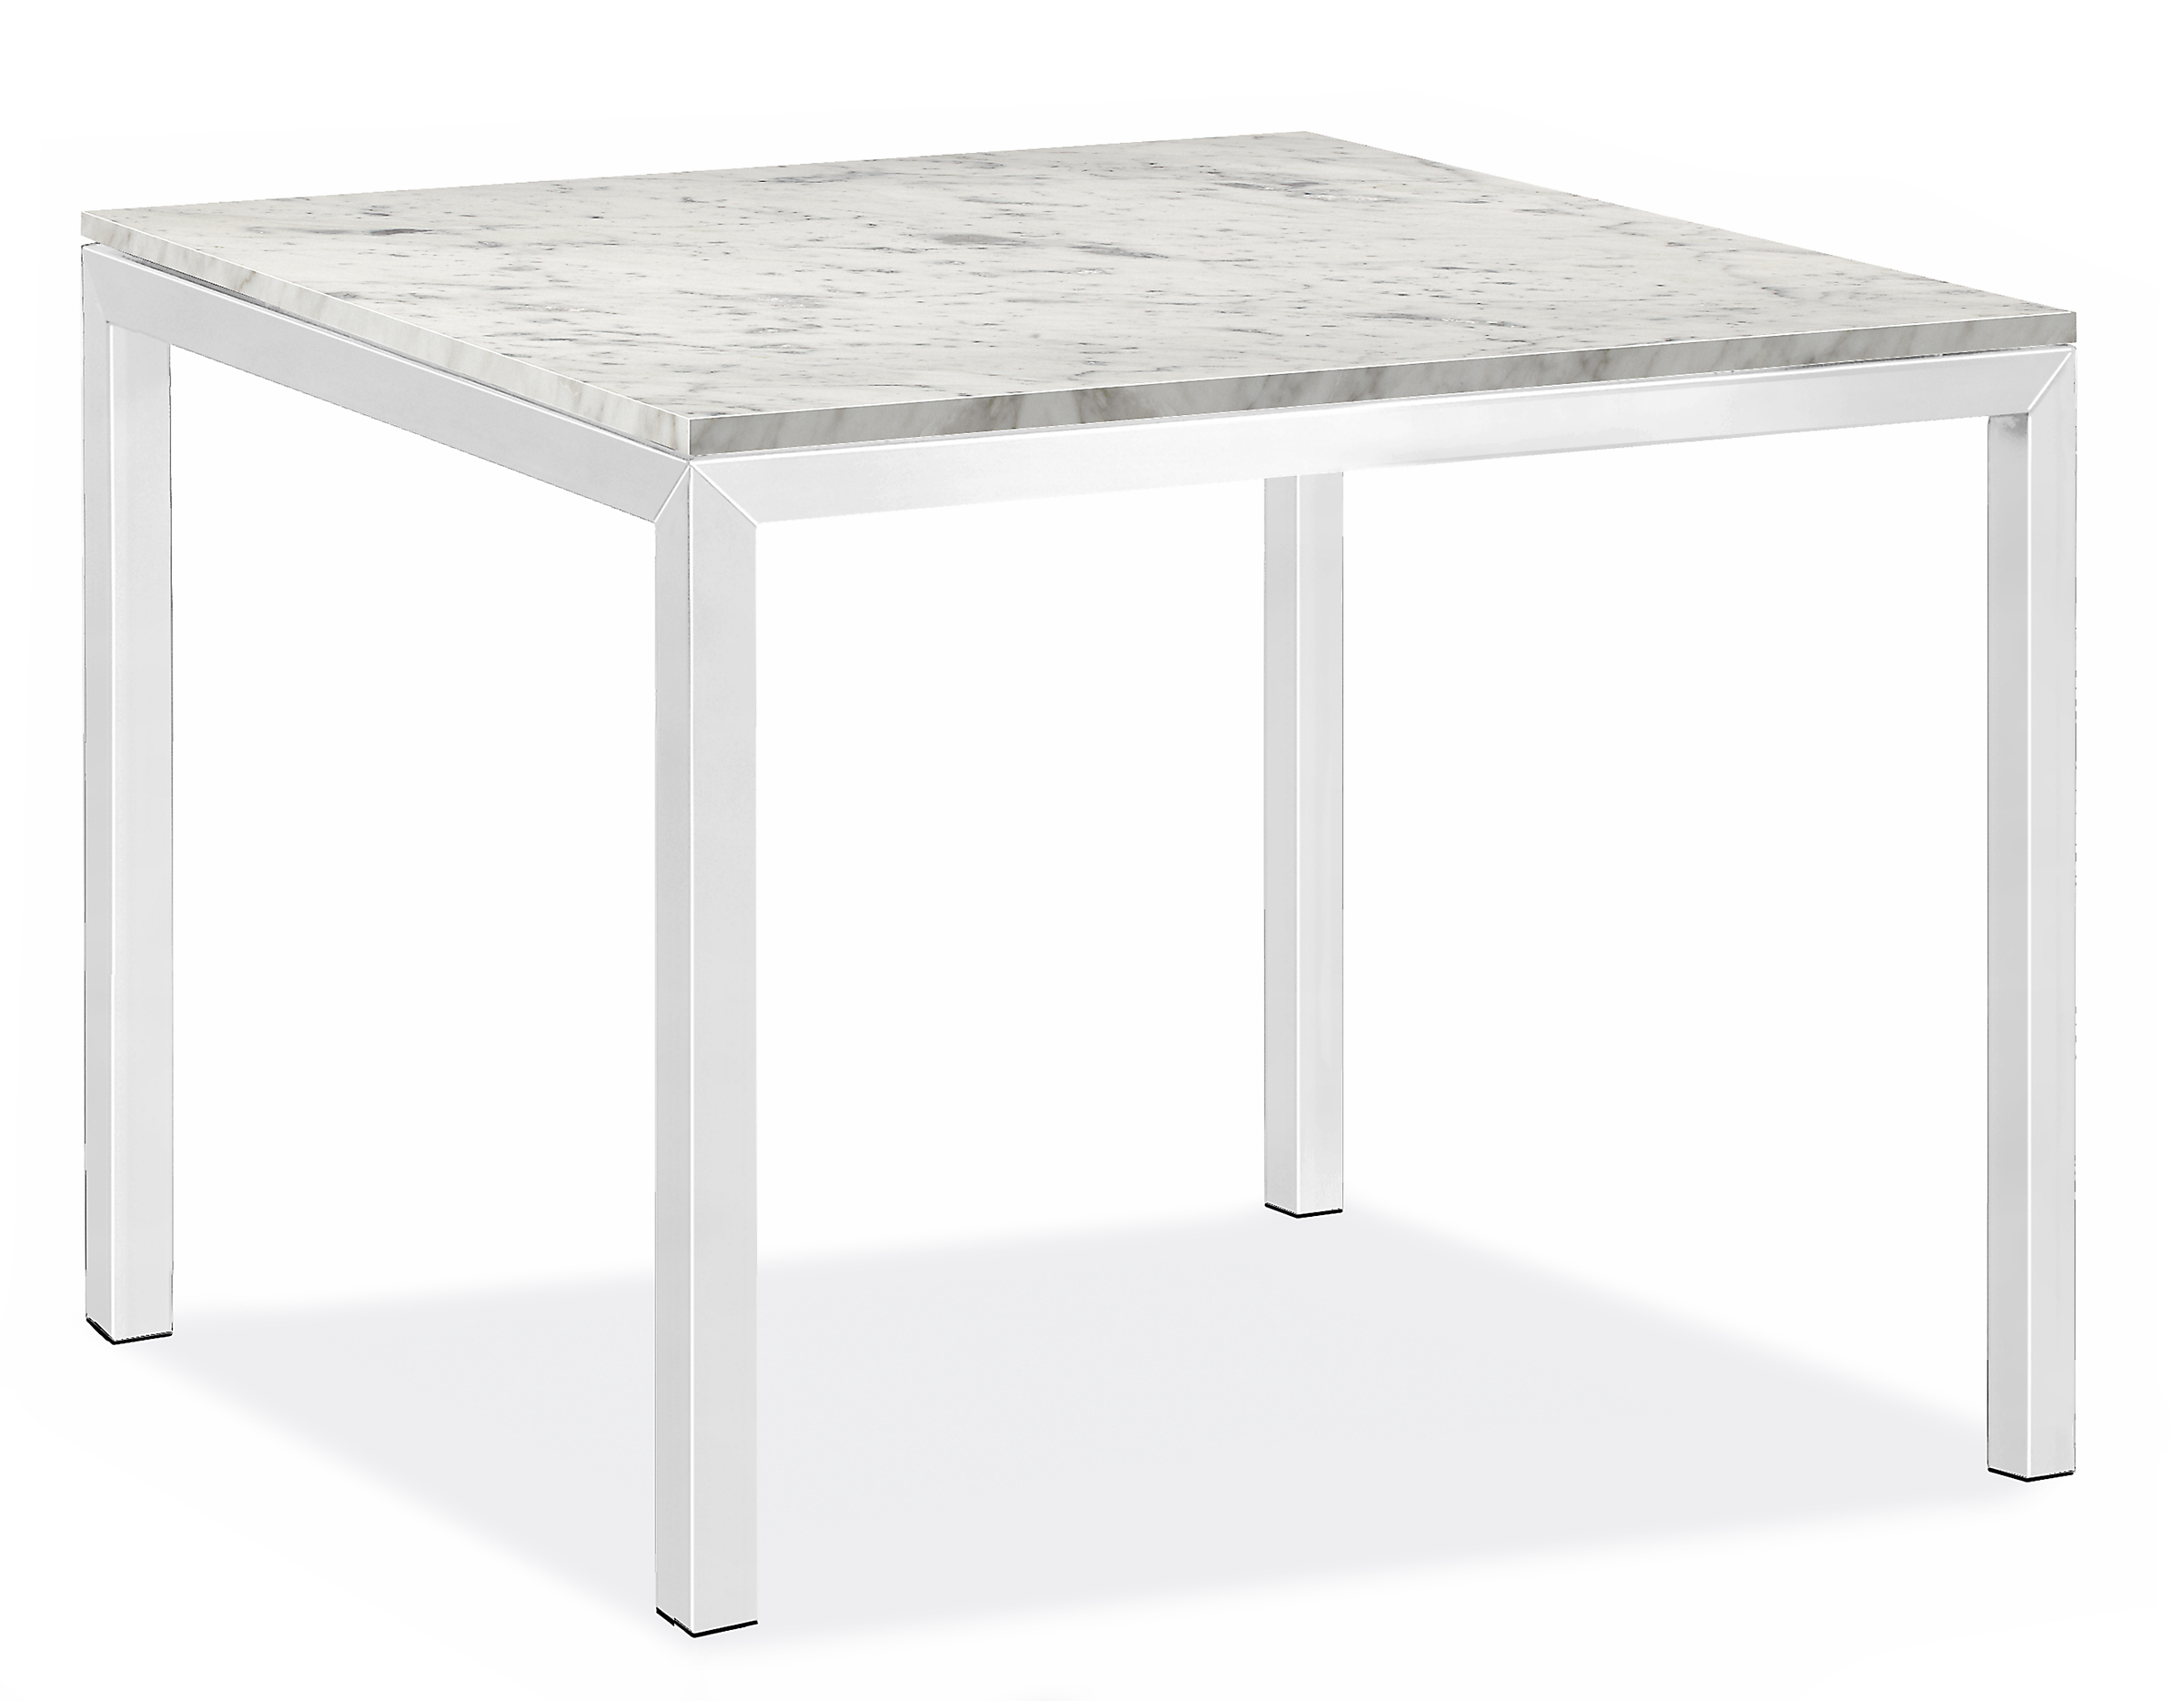 Parsons 56w 56d 29h Dining Table in 2" Stainless Steel with Venatino Marble Top